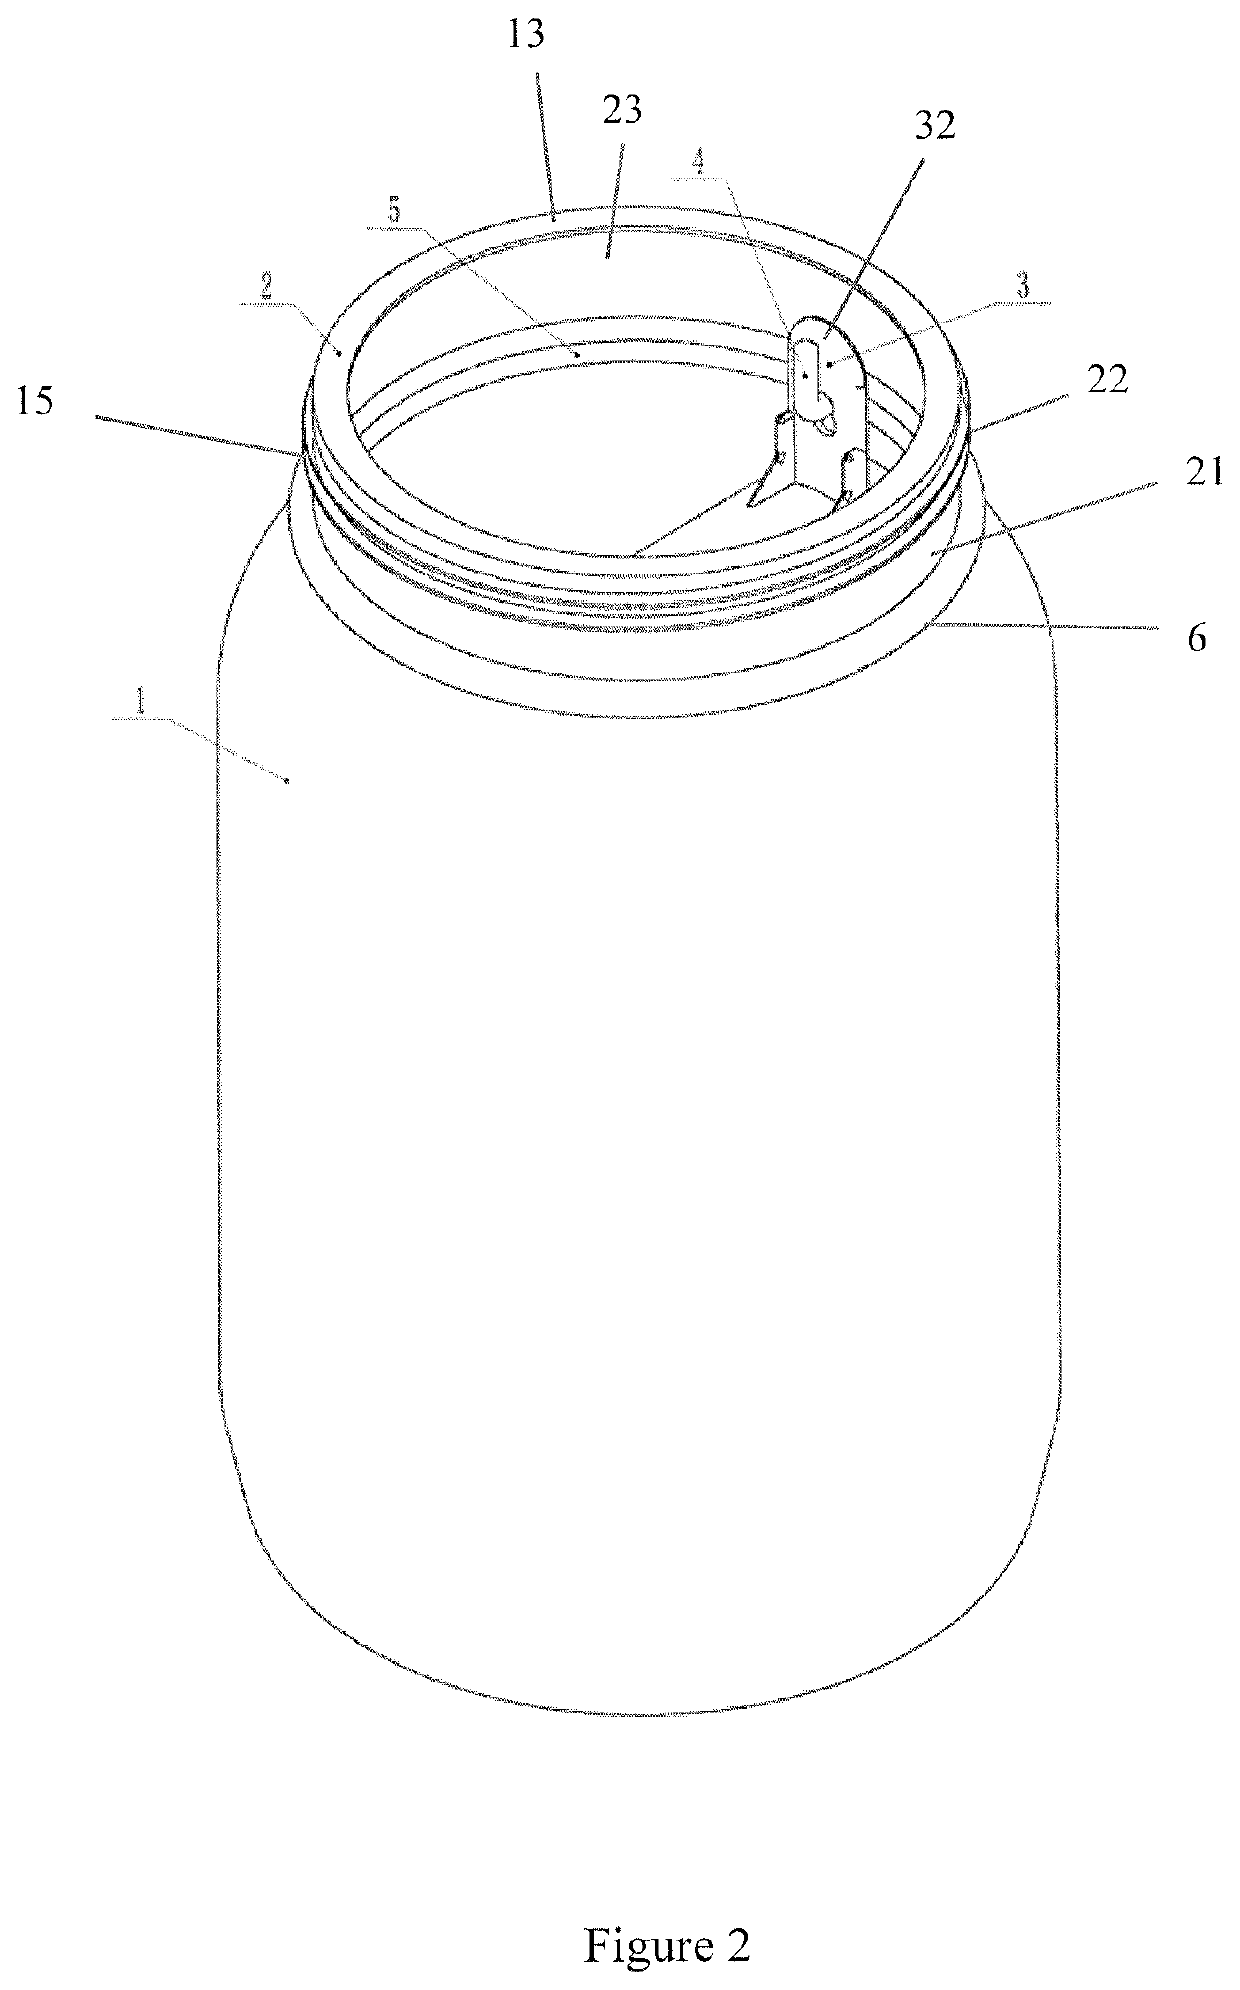 Device built in a bottle mouth for hanging a spoon